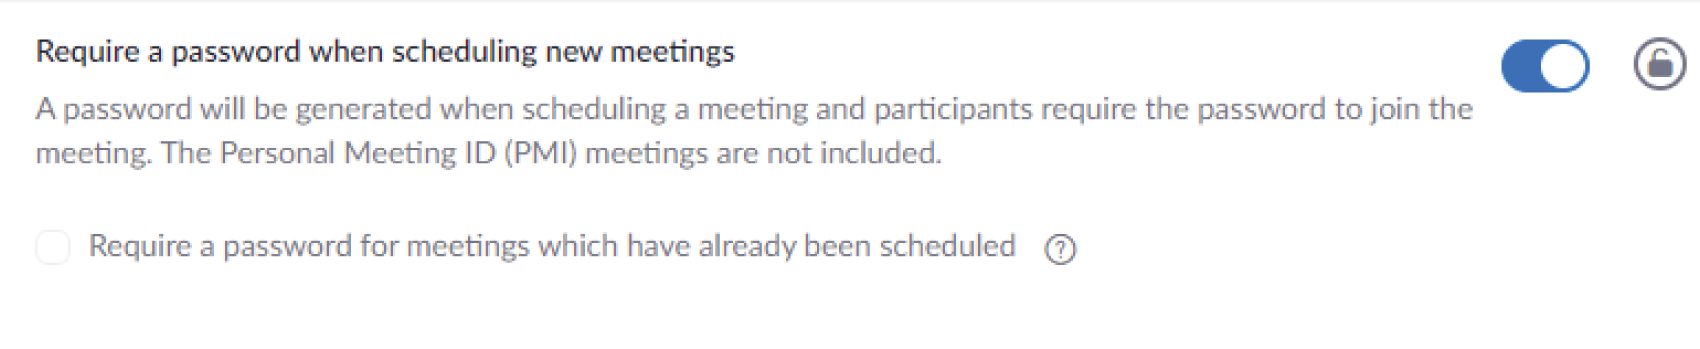 Snapshot of turning on the require password when scheduling new meetings.